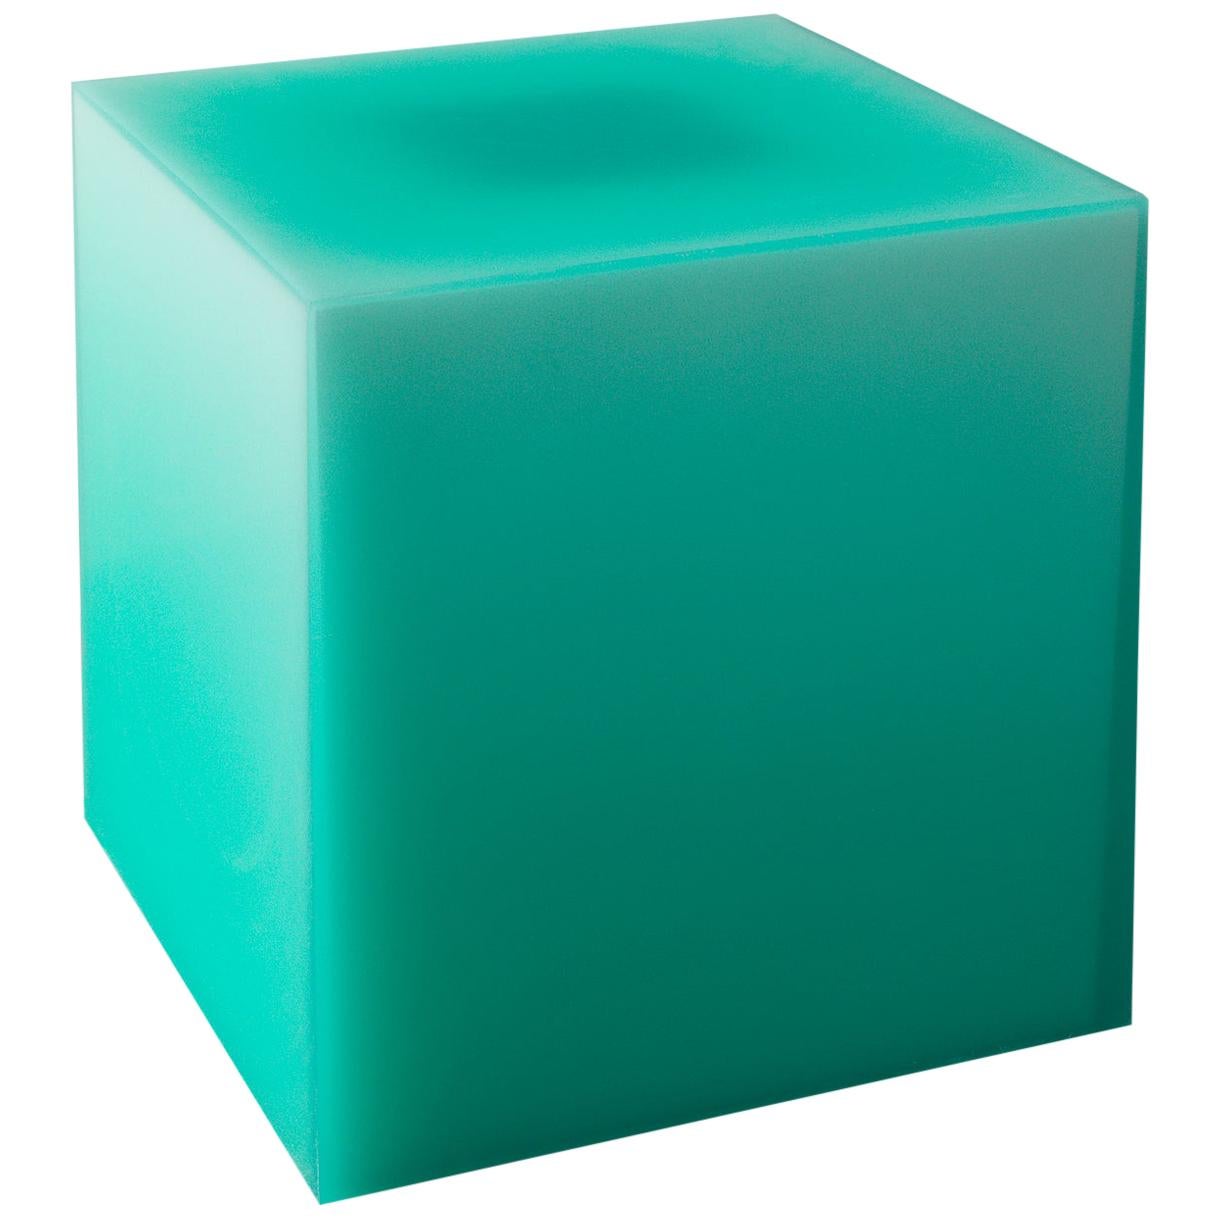 Pool Cube Resin Side Table/Stool  Turquoise by Facture REP by Tuleste Factory For Sale